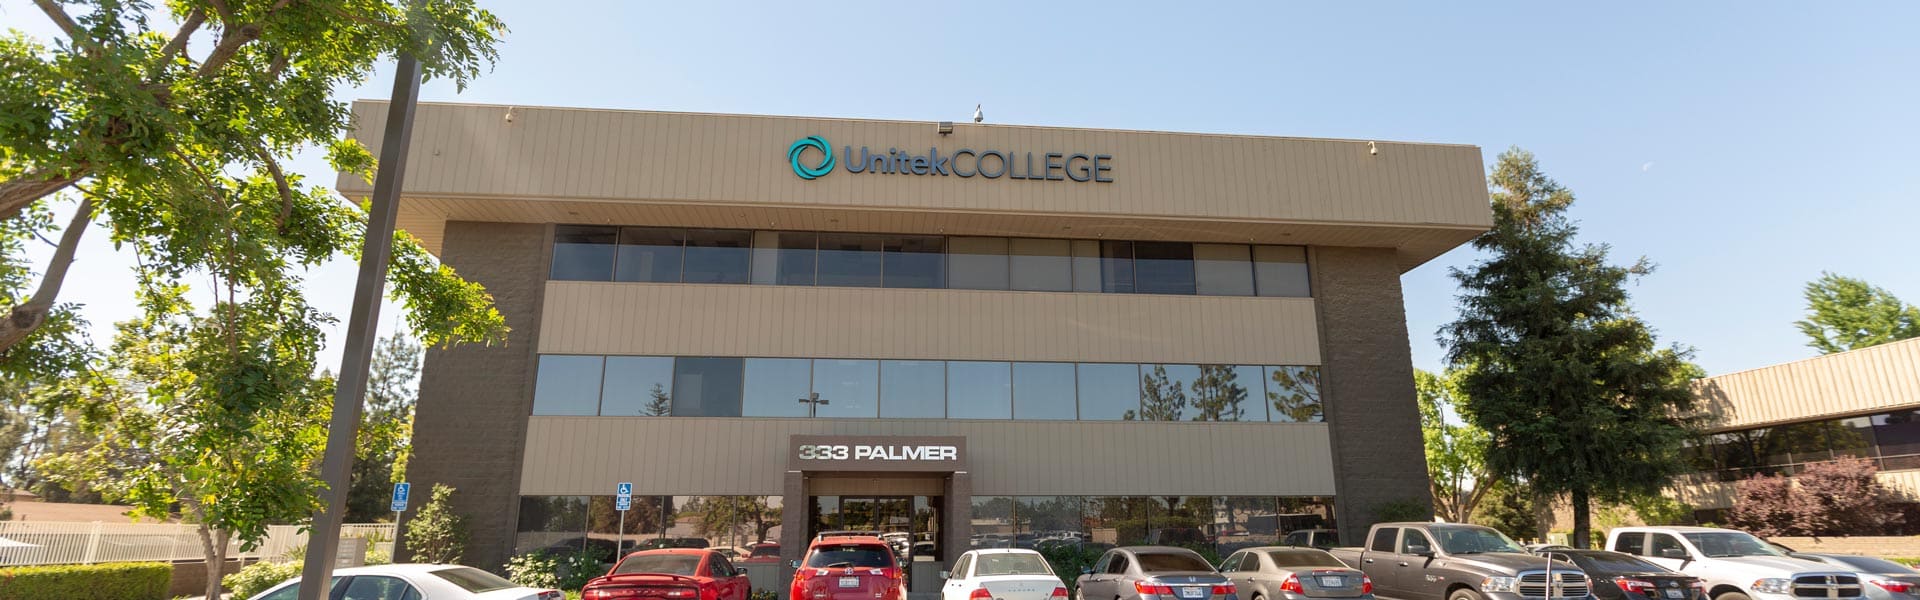 exterior view of the Bakersfield campus with the sun shining